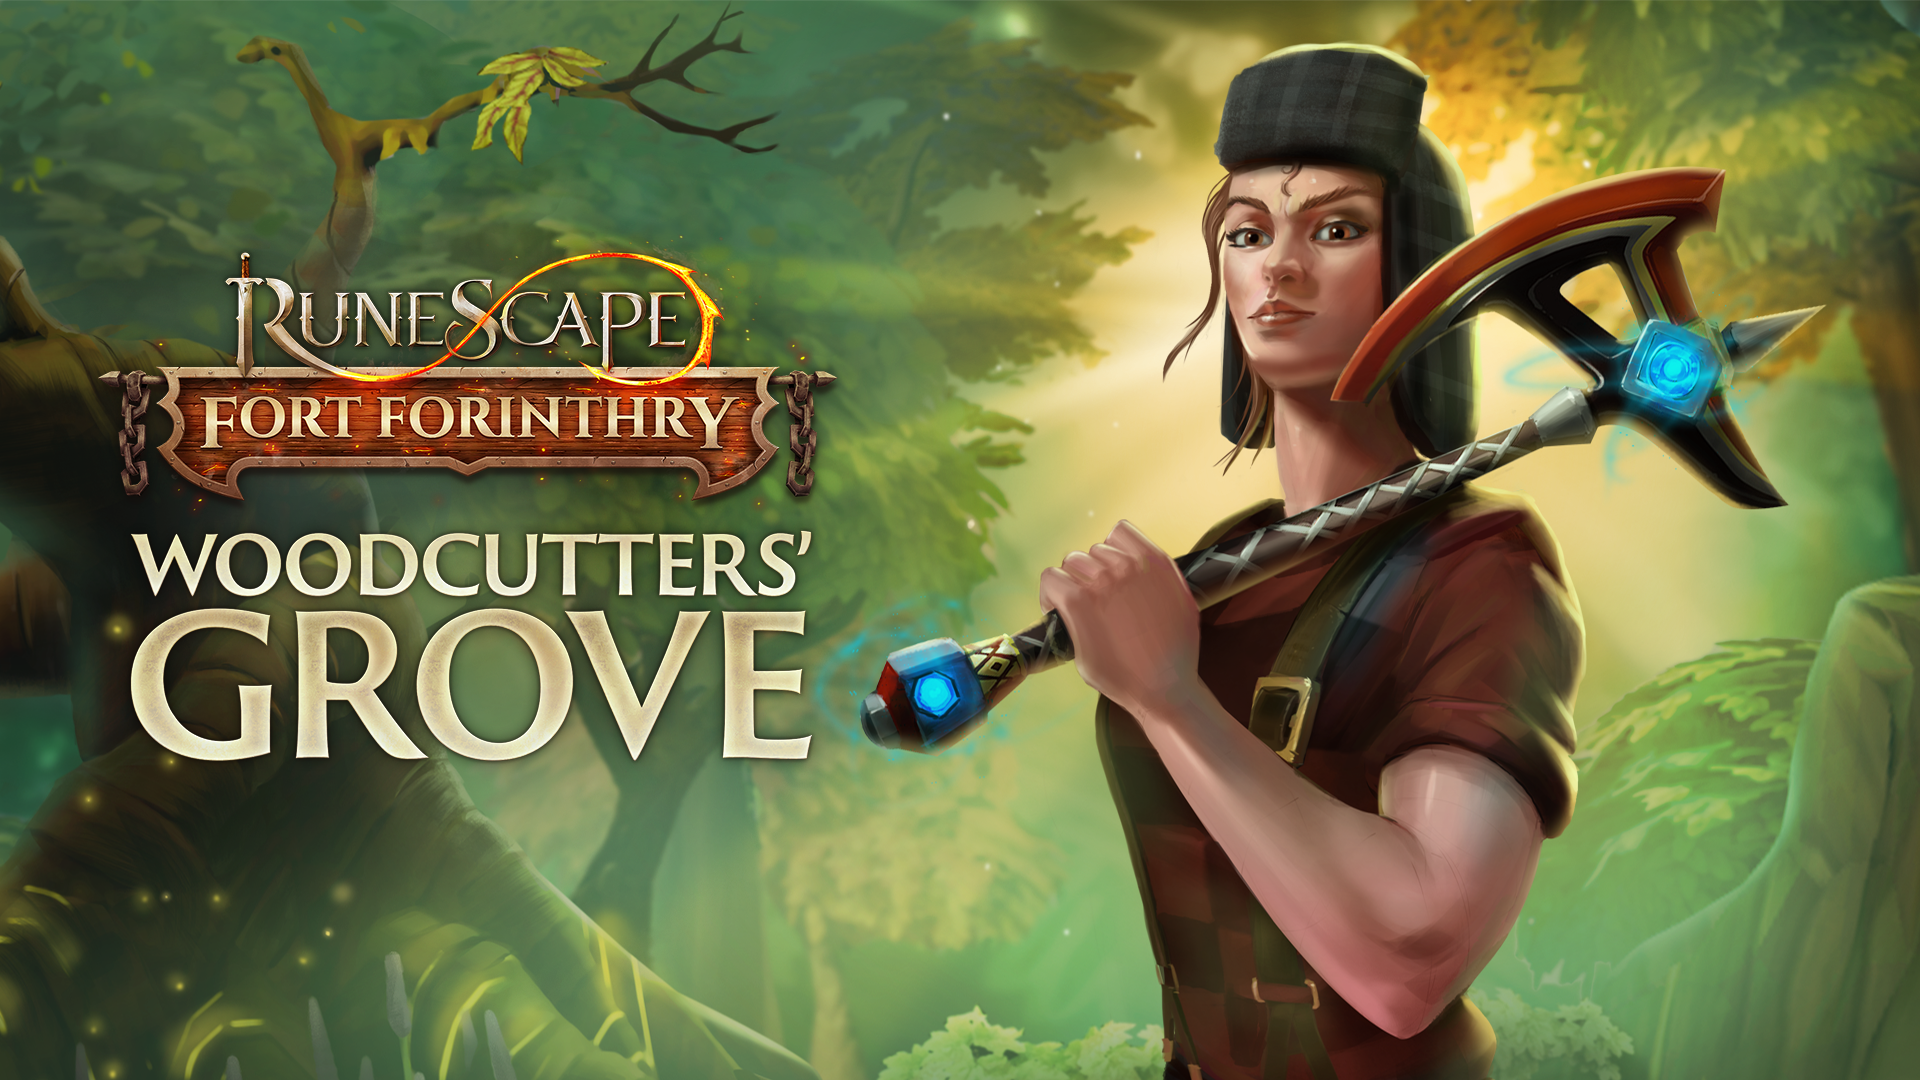 RuneScape Releases Fort Forinthry: New Foundations